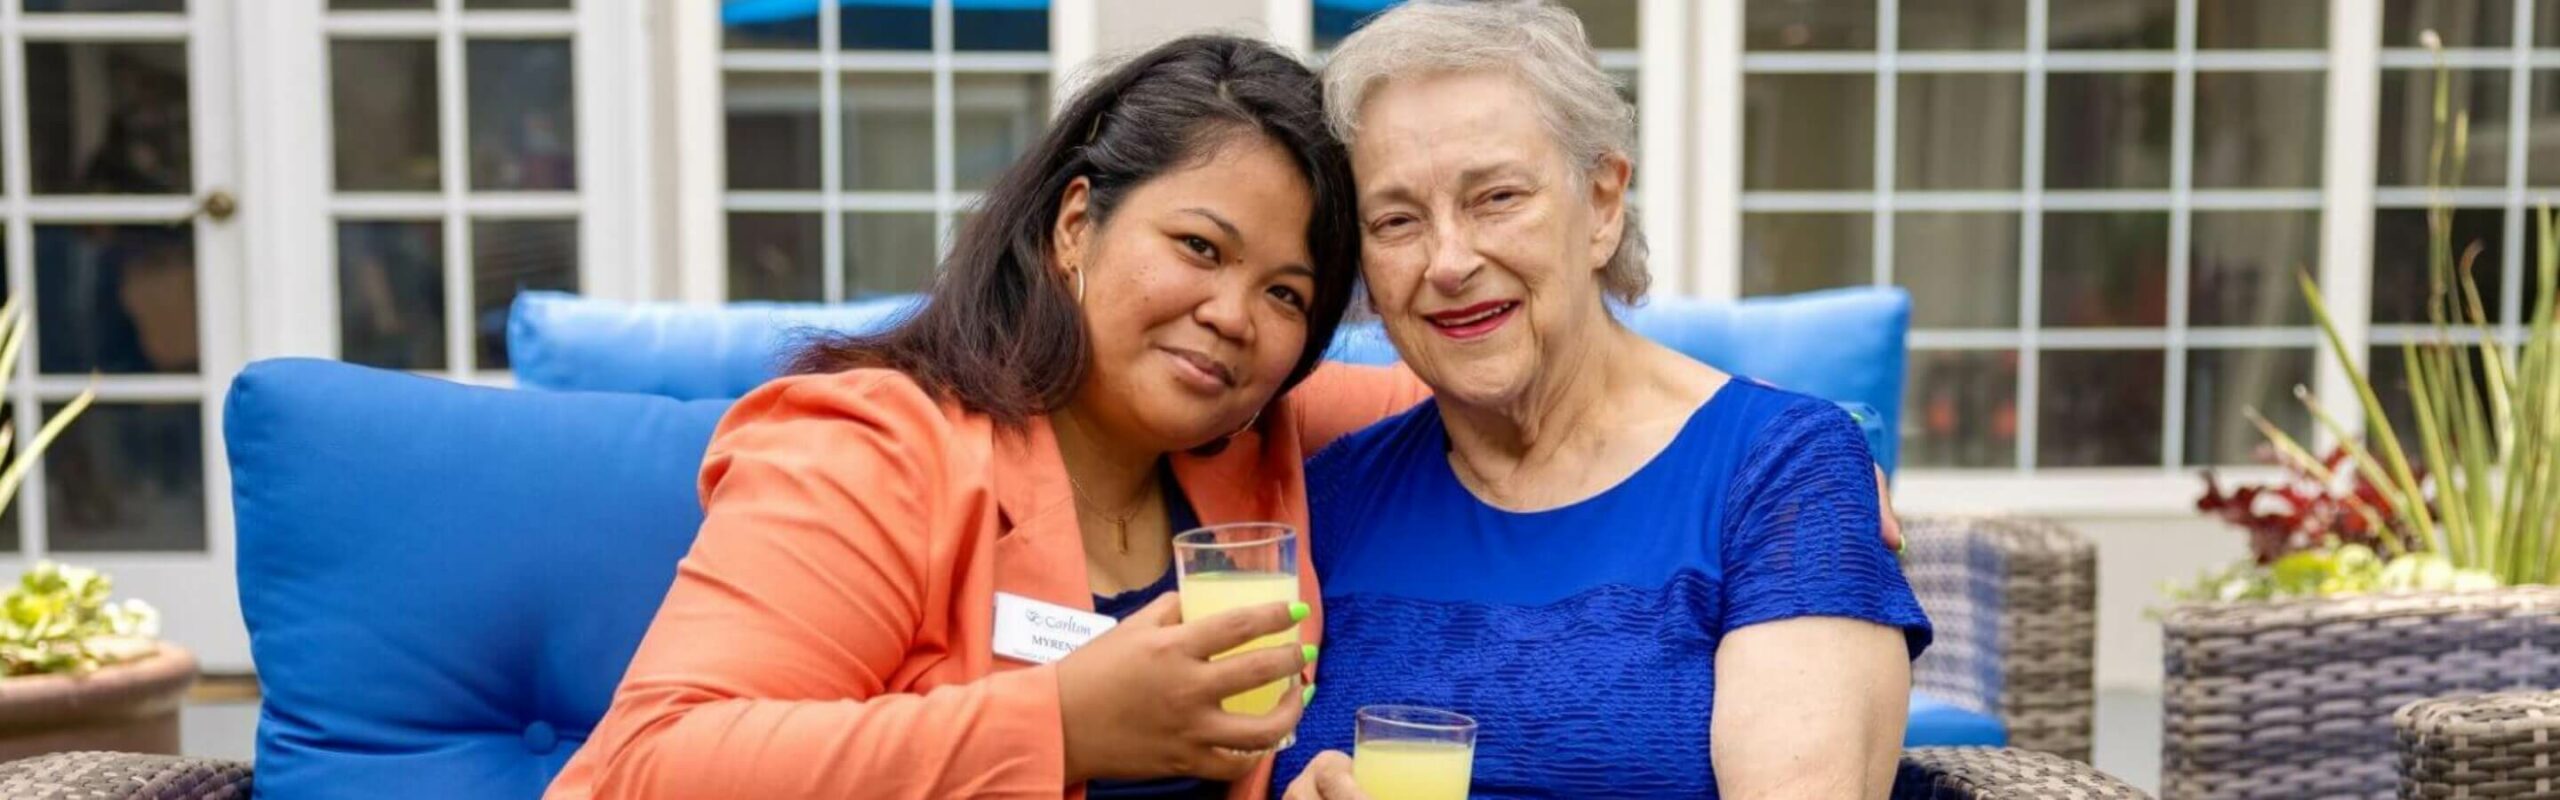 An elderly woman shares a moment with a Carlton team member, both holding beverages, showcasing the close-knit community at Carlton Senior Living.